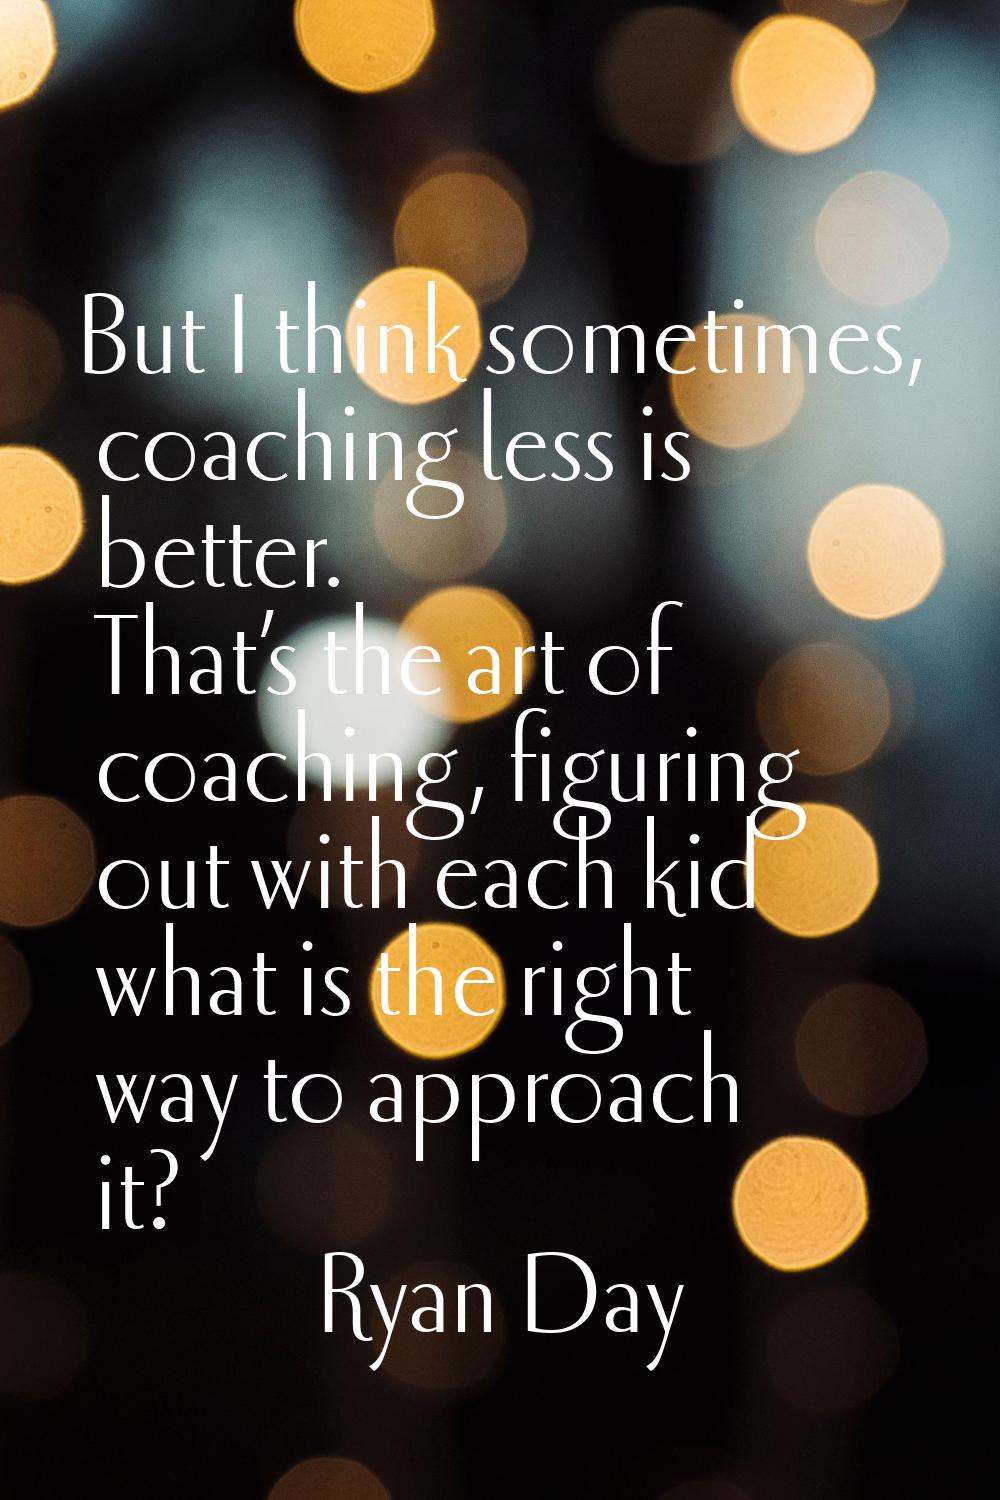 But I think sometimes, coaching less is better. That’s the art of coaching, figuring out with each 